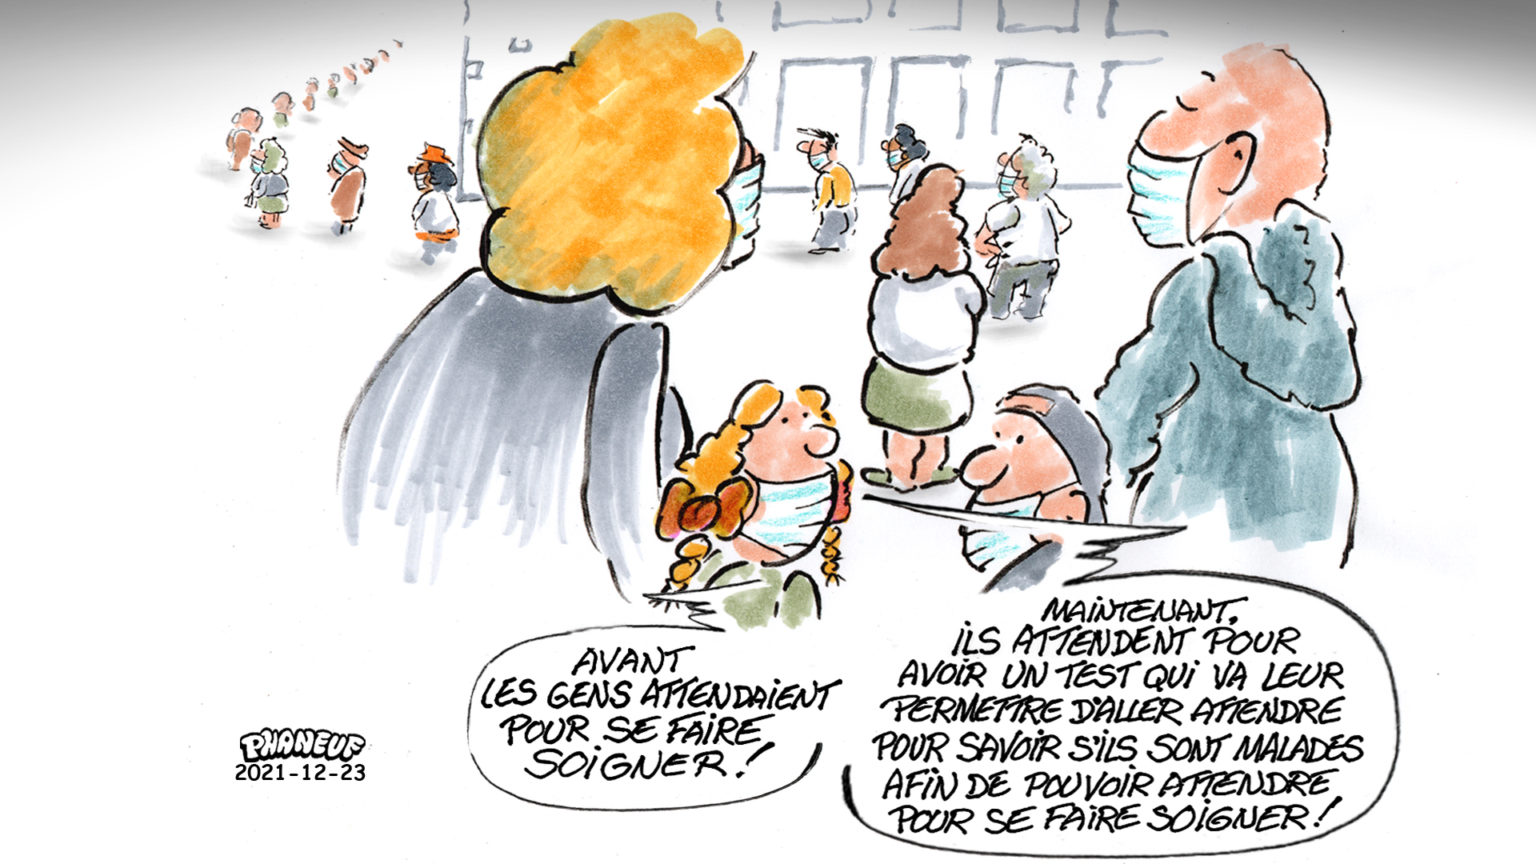 Caricatures .... - Page 3 2021-12-23-FILE-DATTENTE-1536x864